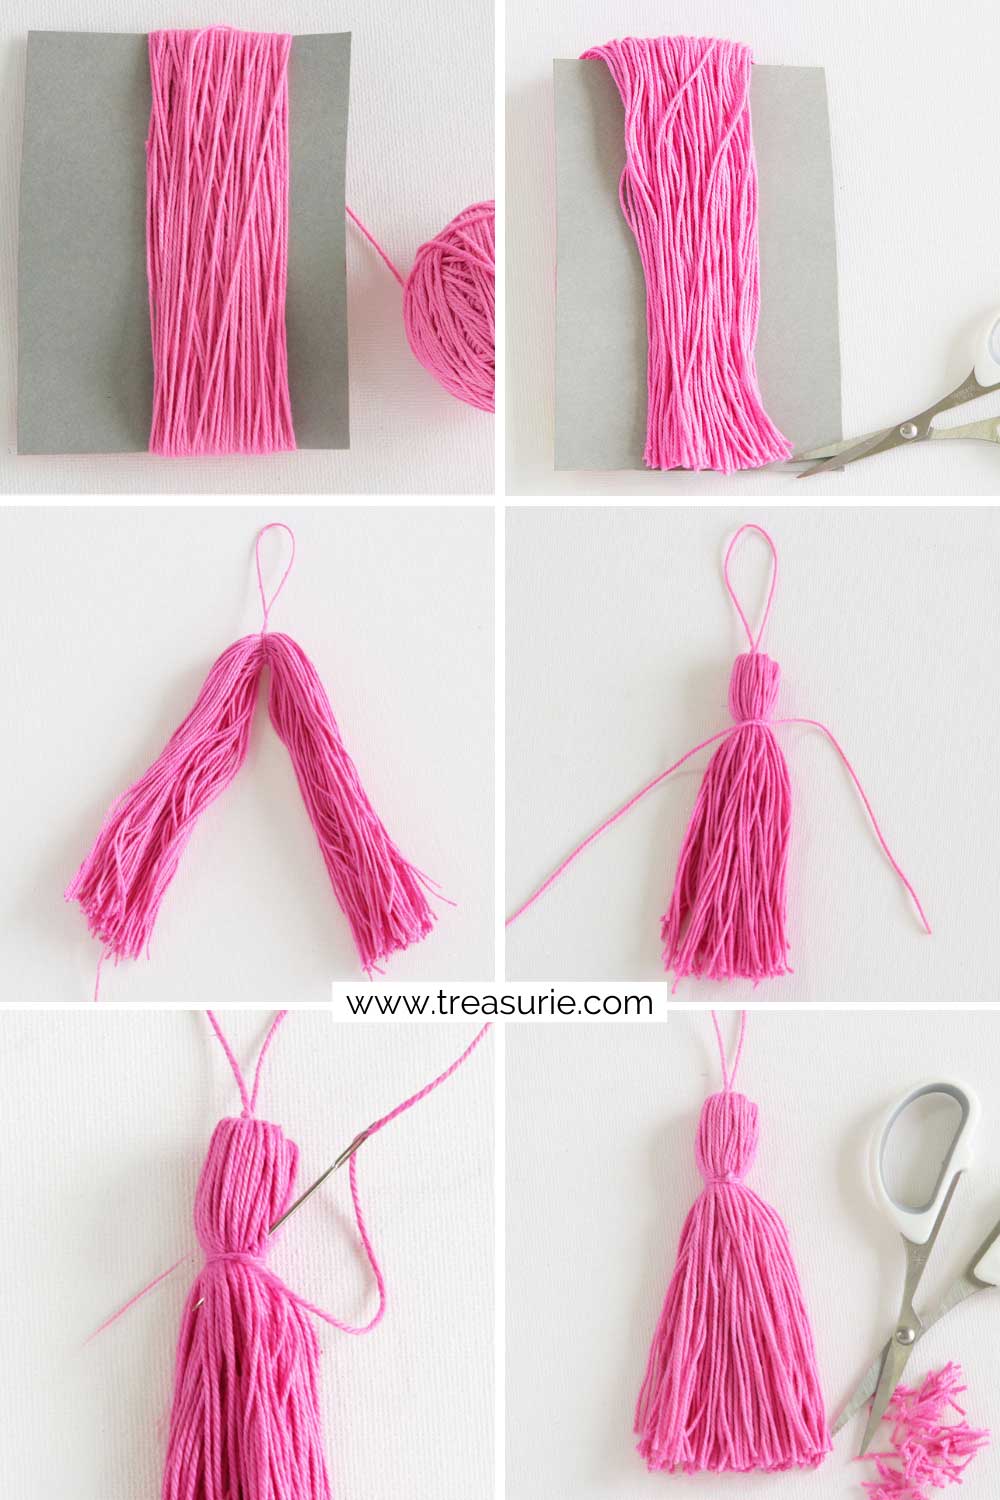 How To Make Tassels Diy The 2